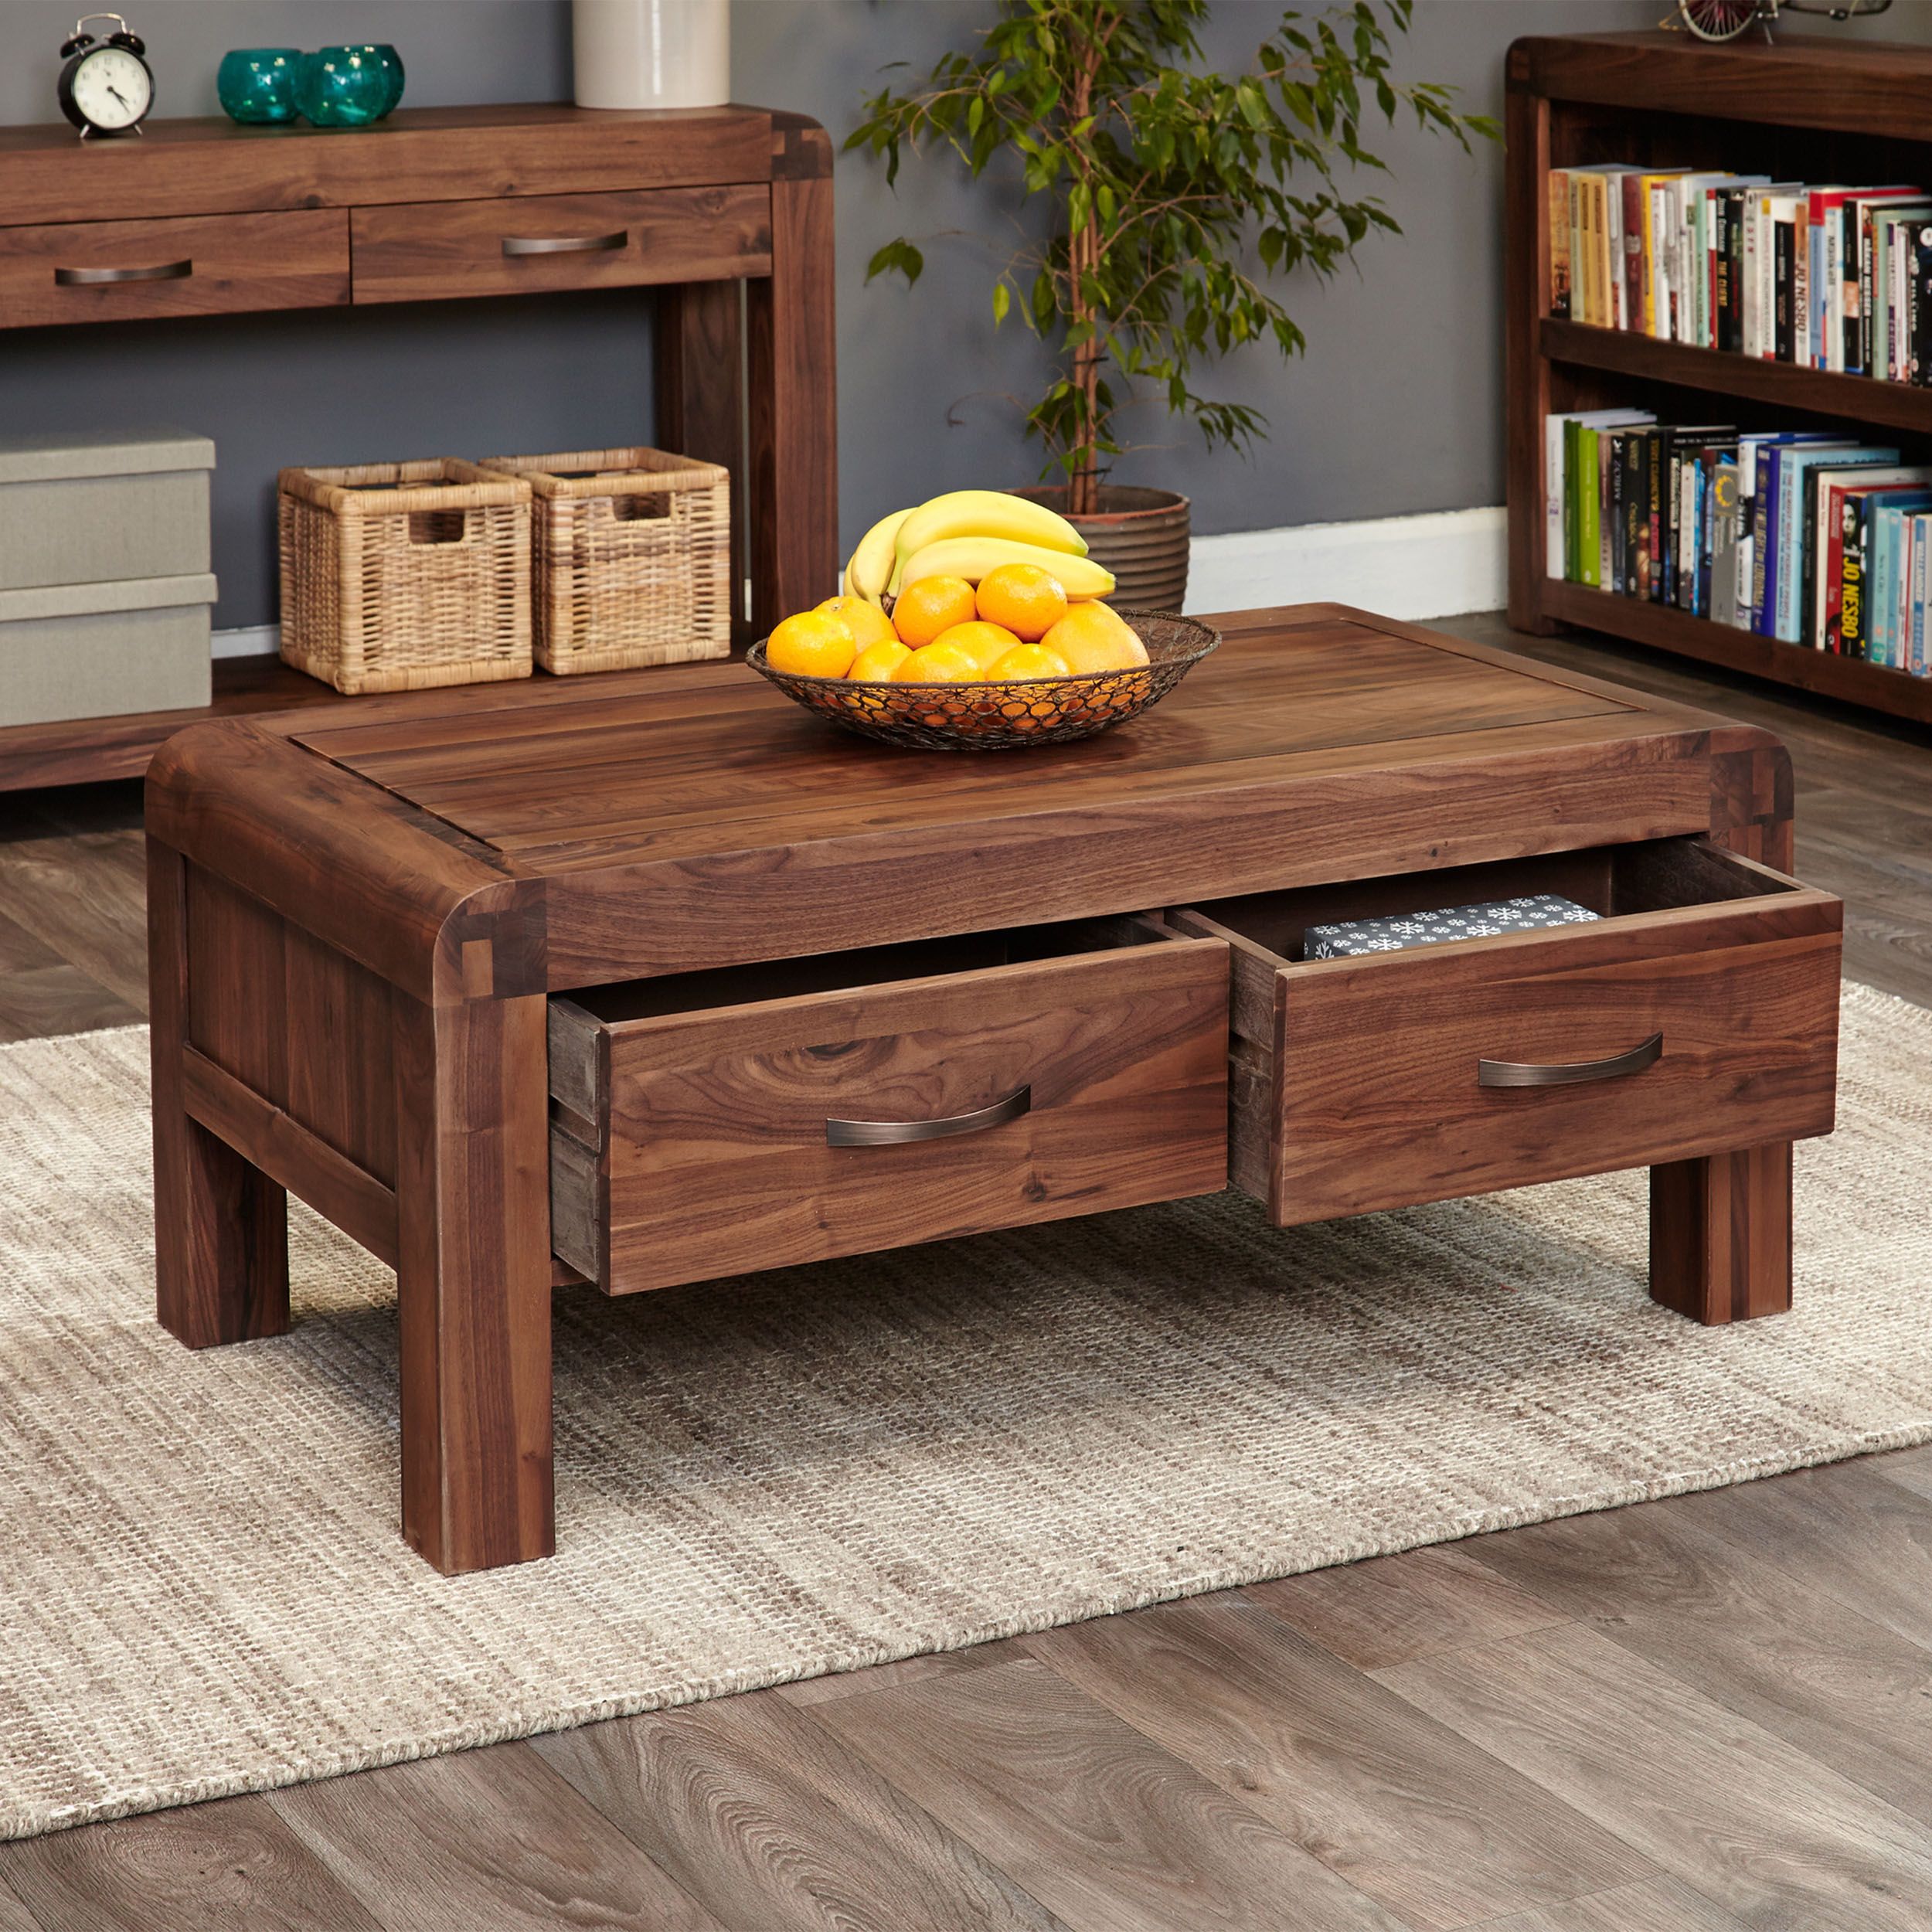 Solid Walnut Coffee Table With Storage – Shiro Throughout Wood Coffee Tables With 2 Tier Storage (View 9 of 20)